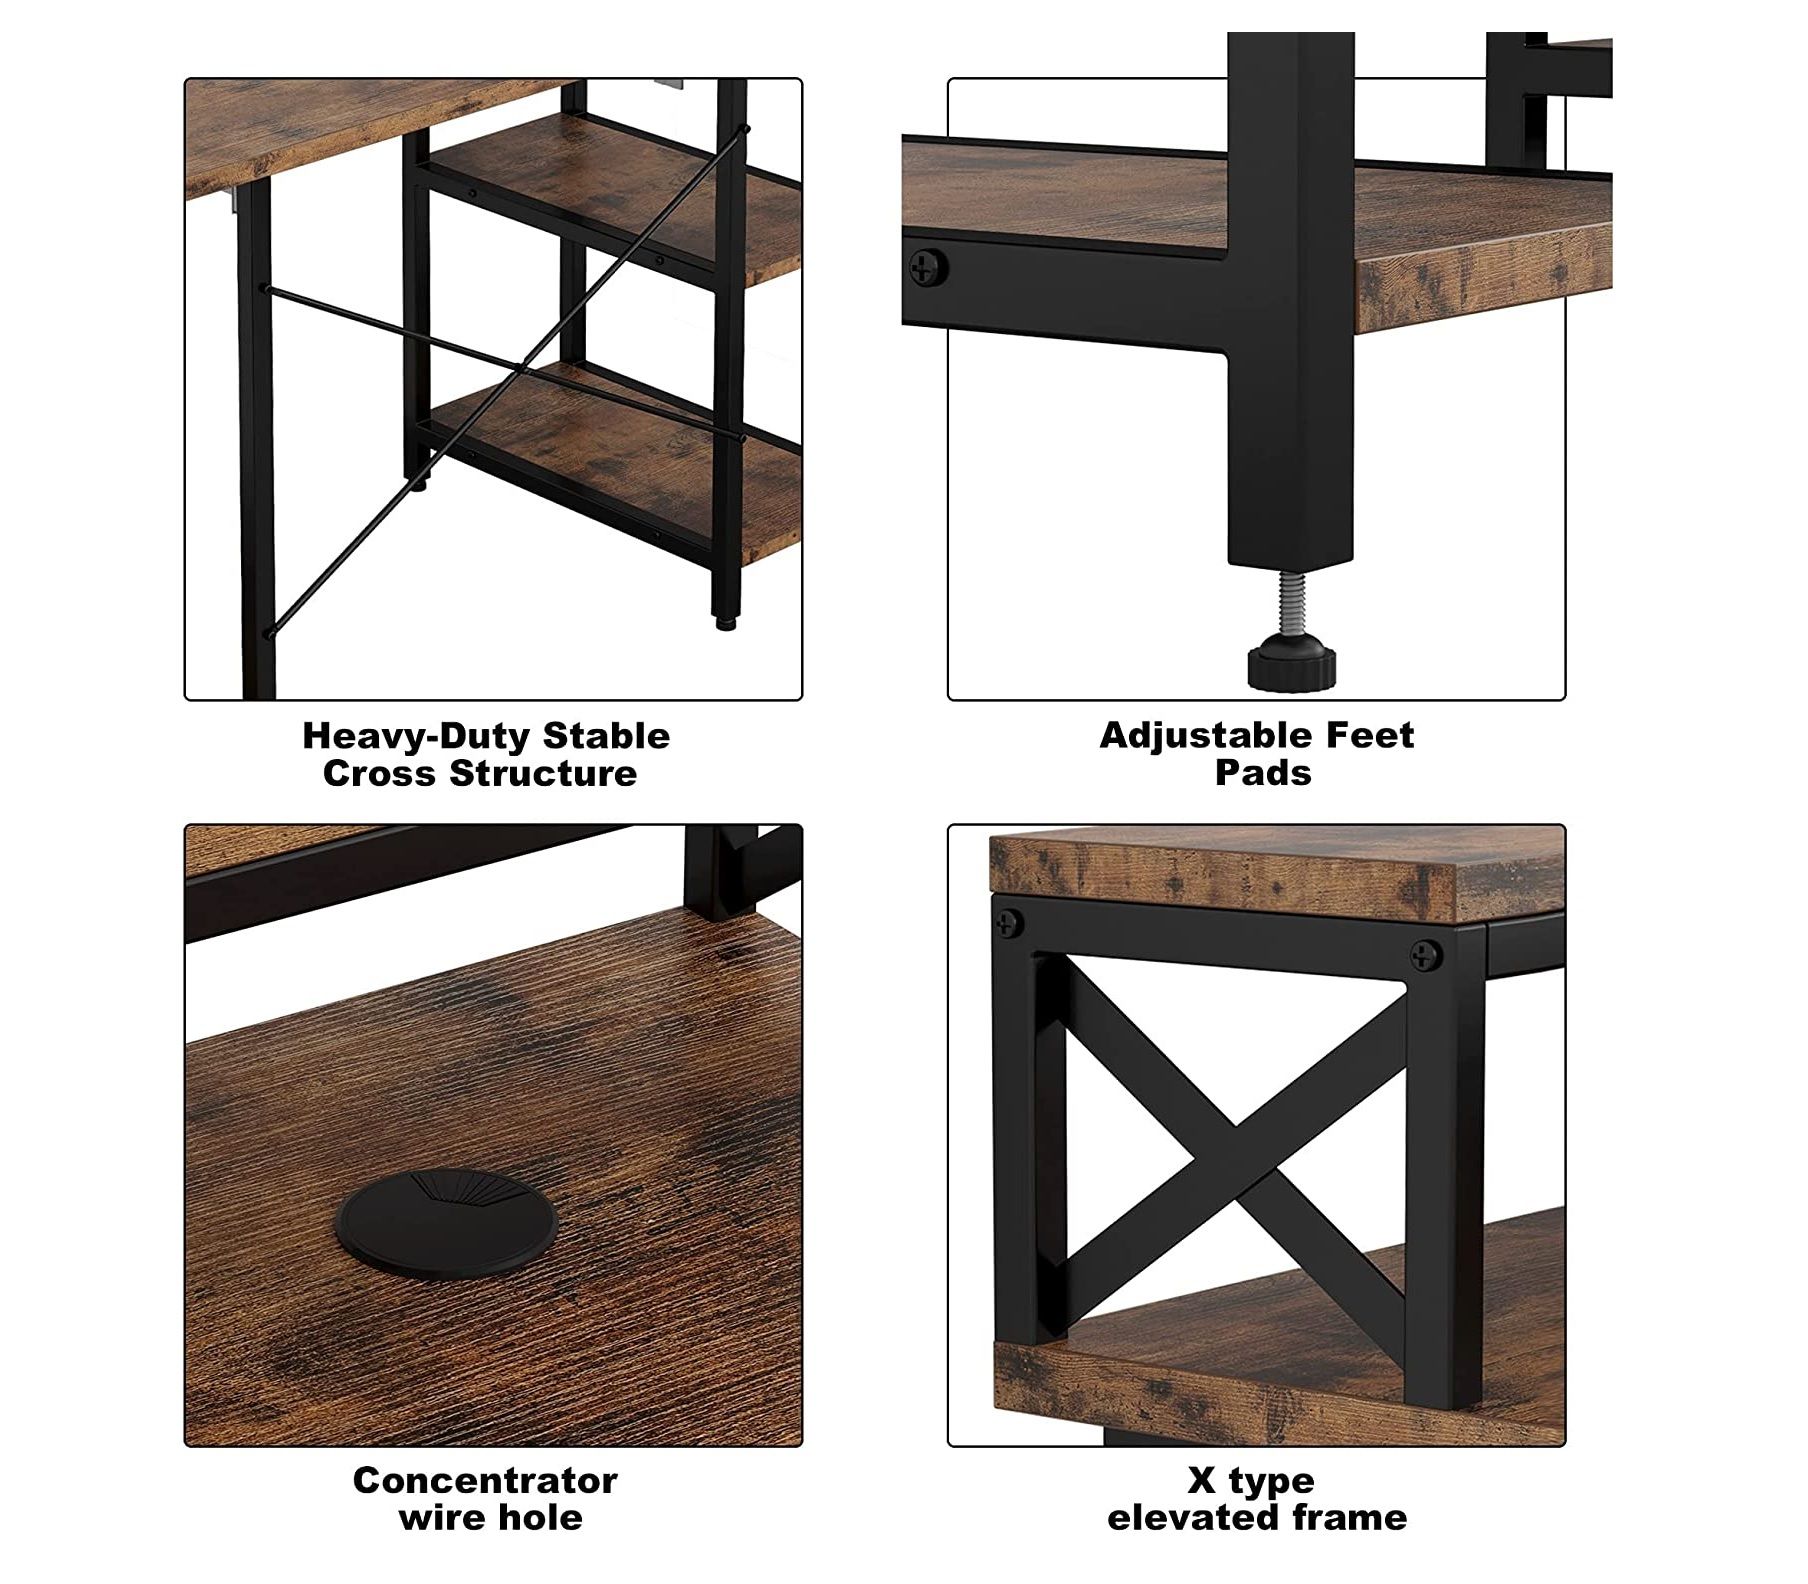 design features of the ironck computer desk